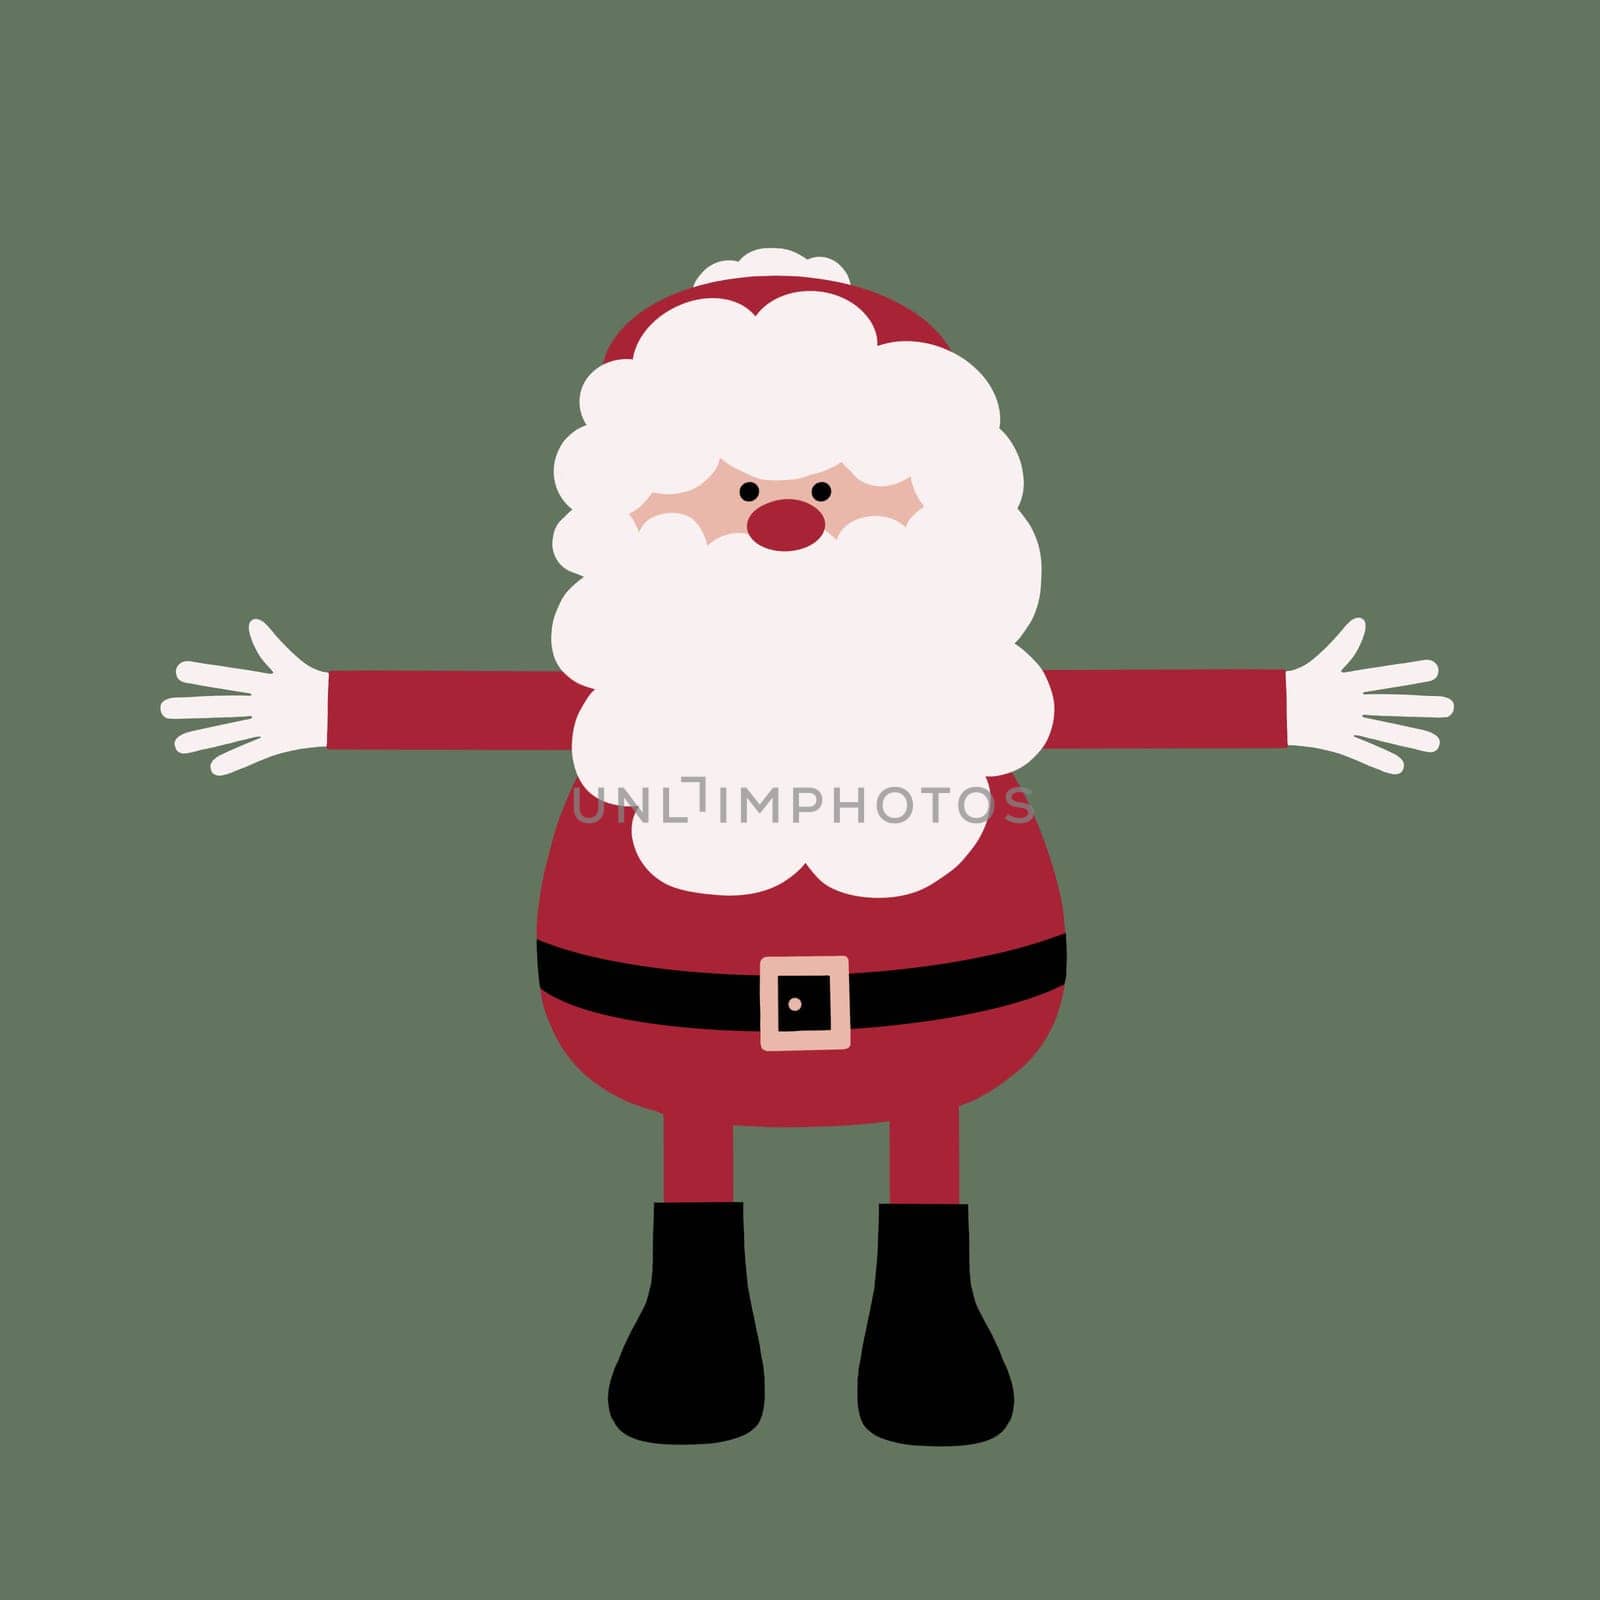 Illustration of a fun quirky Santa with arms out wide ready for a hug. Santa hug. Welcome. Quirky Father Christmas. Cartoon style Christmas illustration. Perfect for the holiday season.